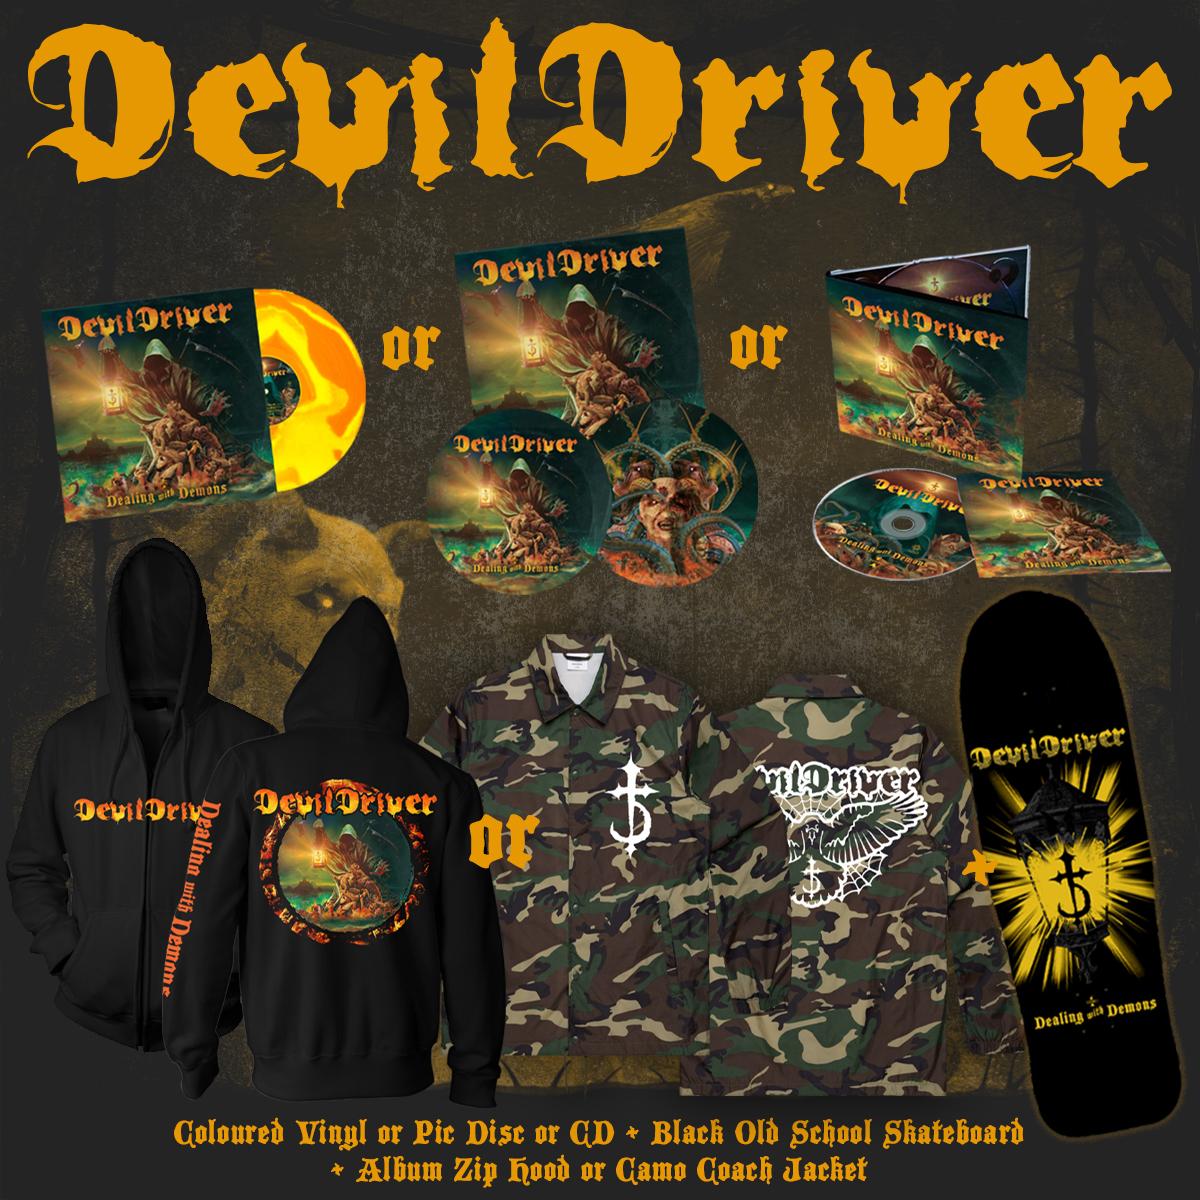 DEVILDRIVER Reveals Entrancing Music Video for New Single "Nest Of Vipers"